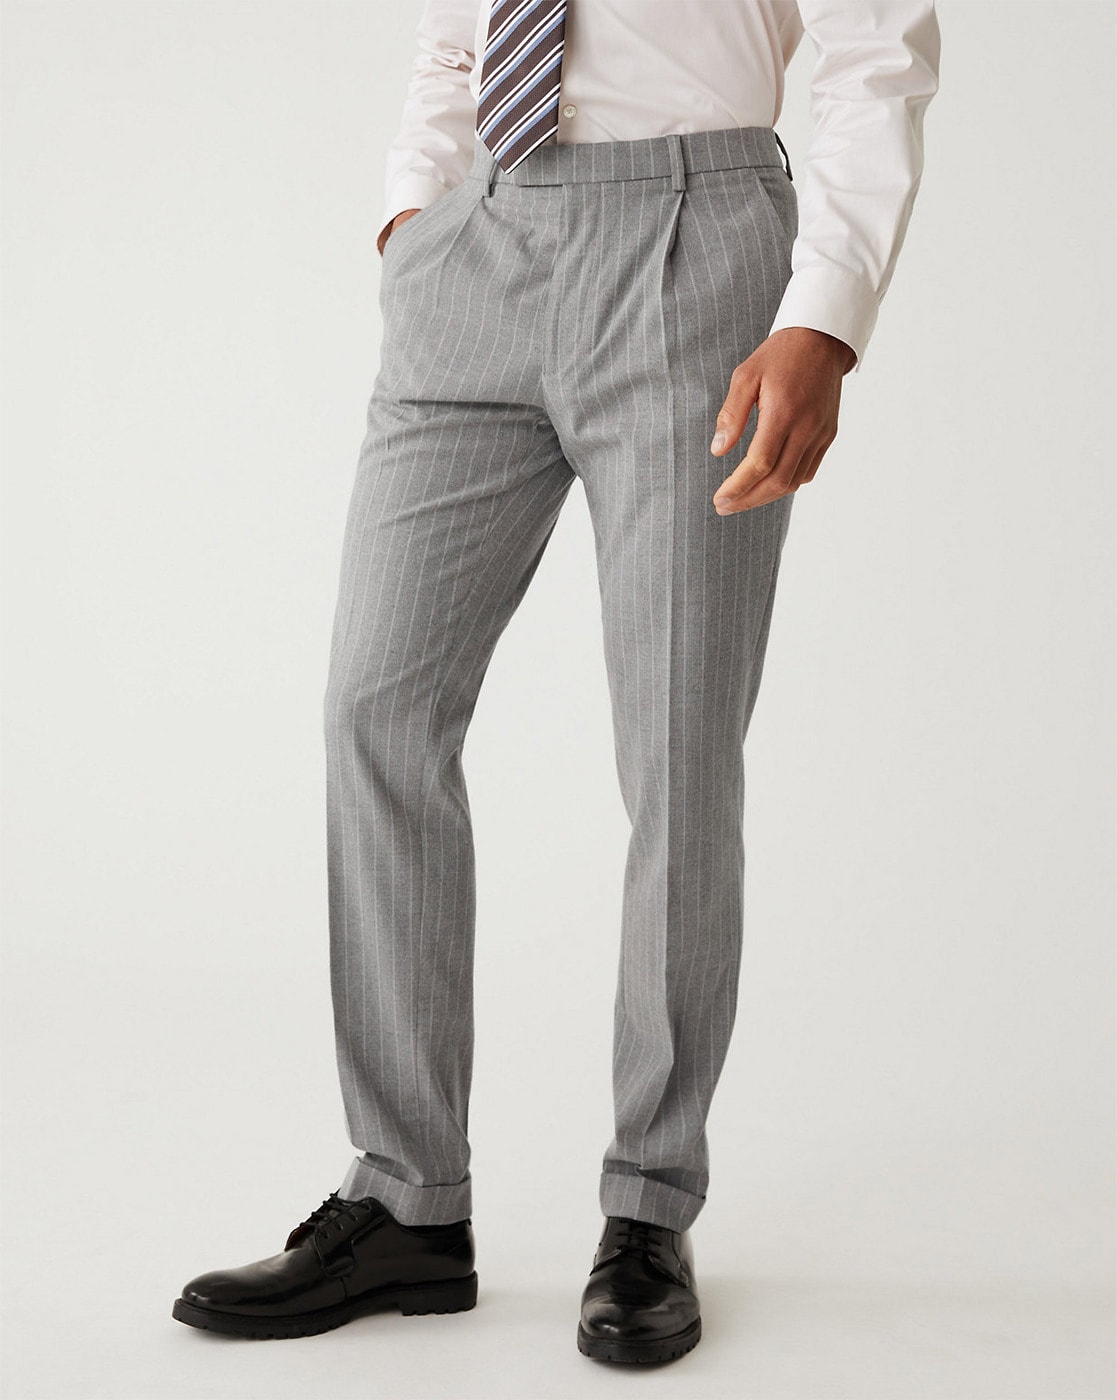 Details more than 138 grey striped trousers mens best